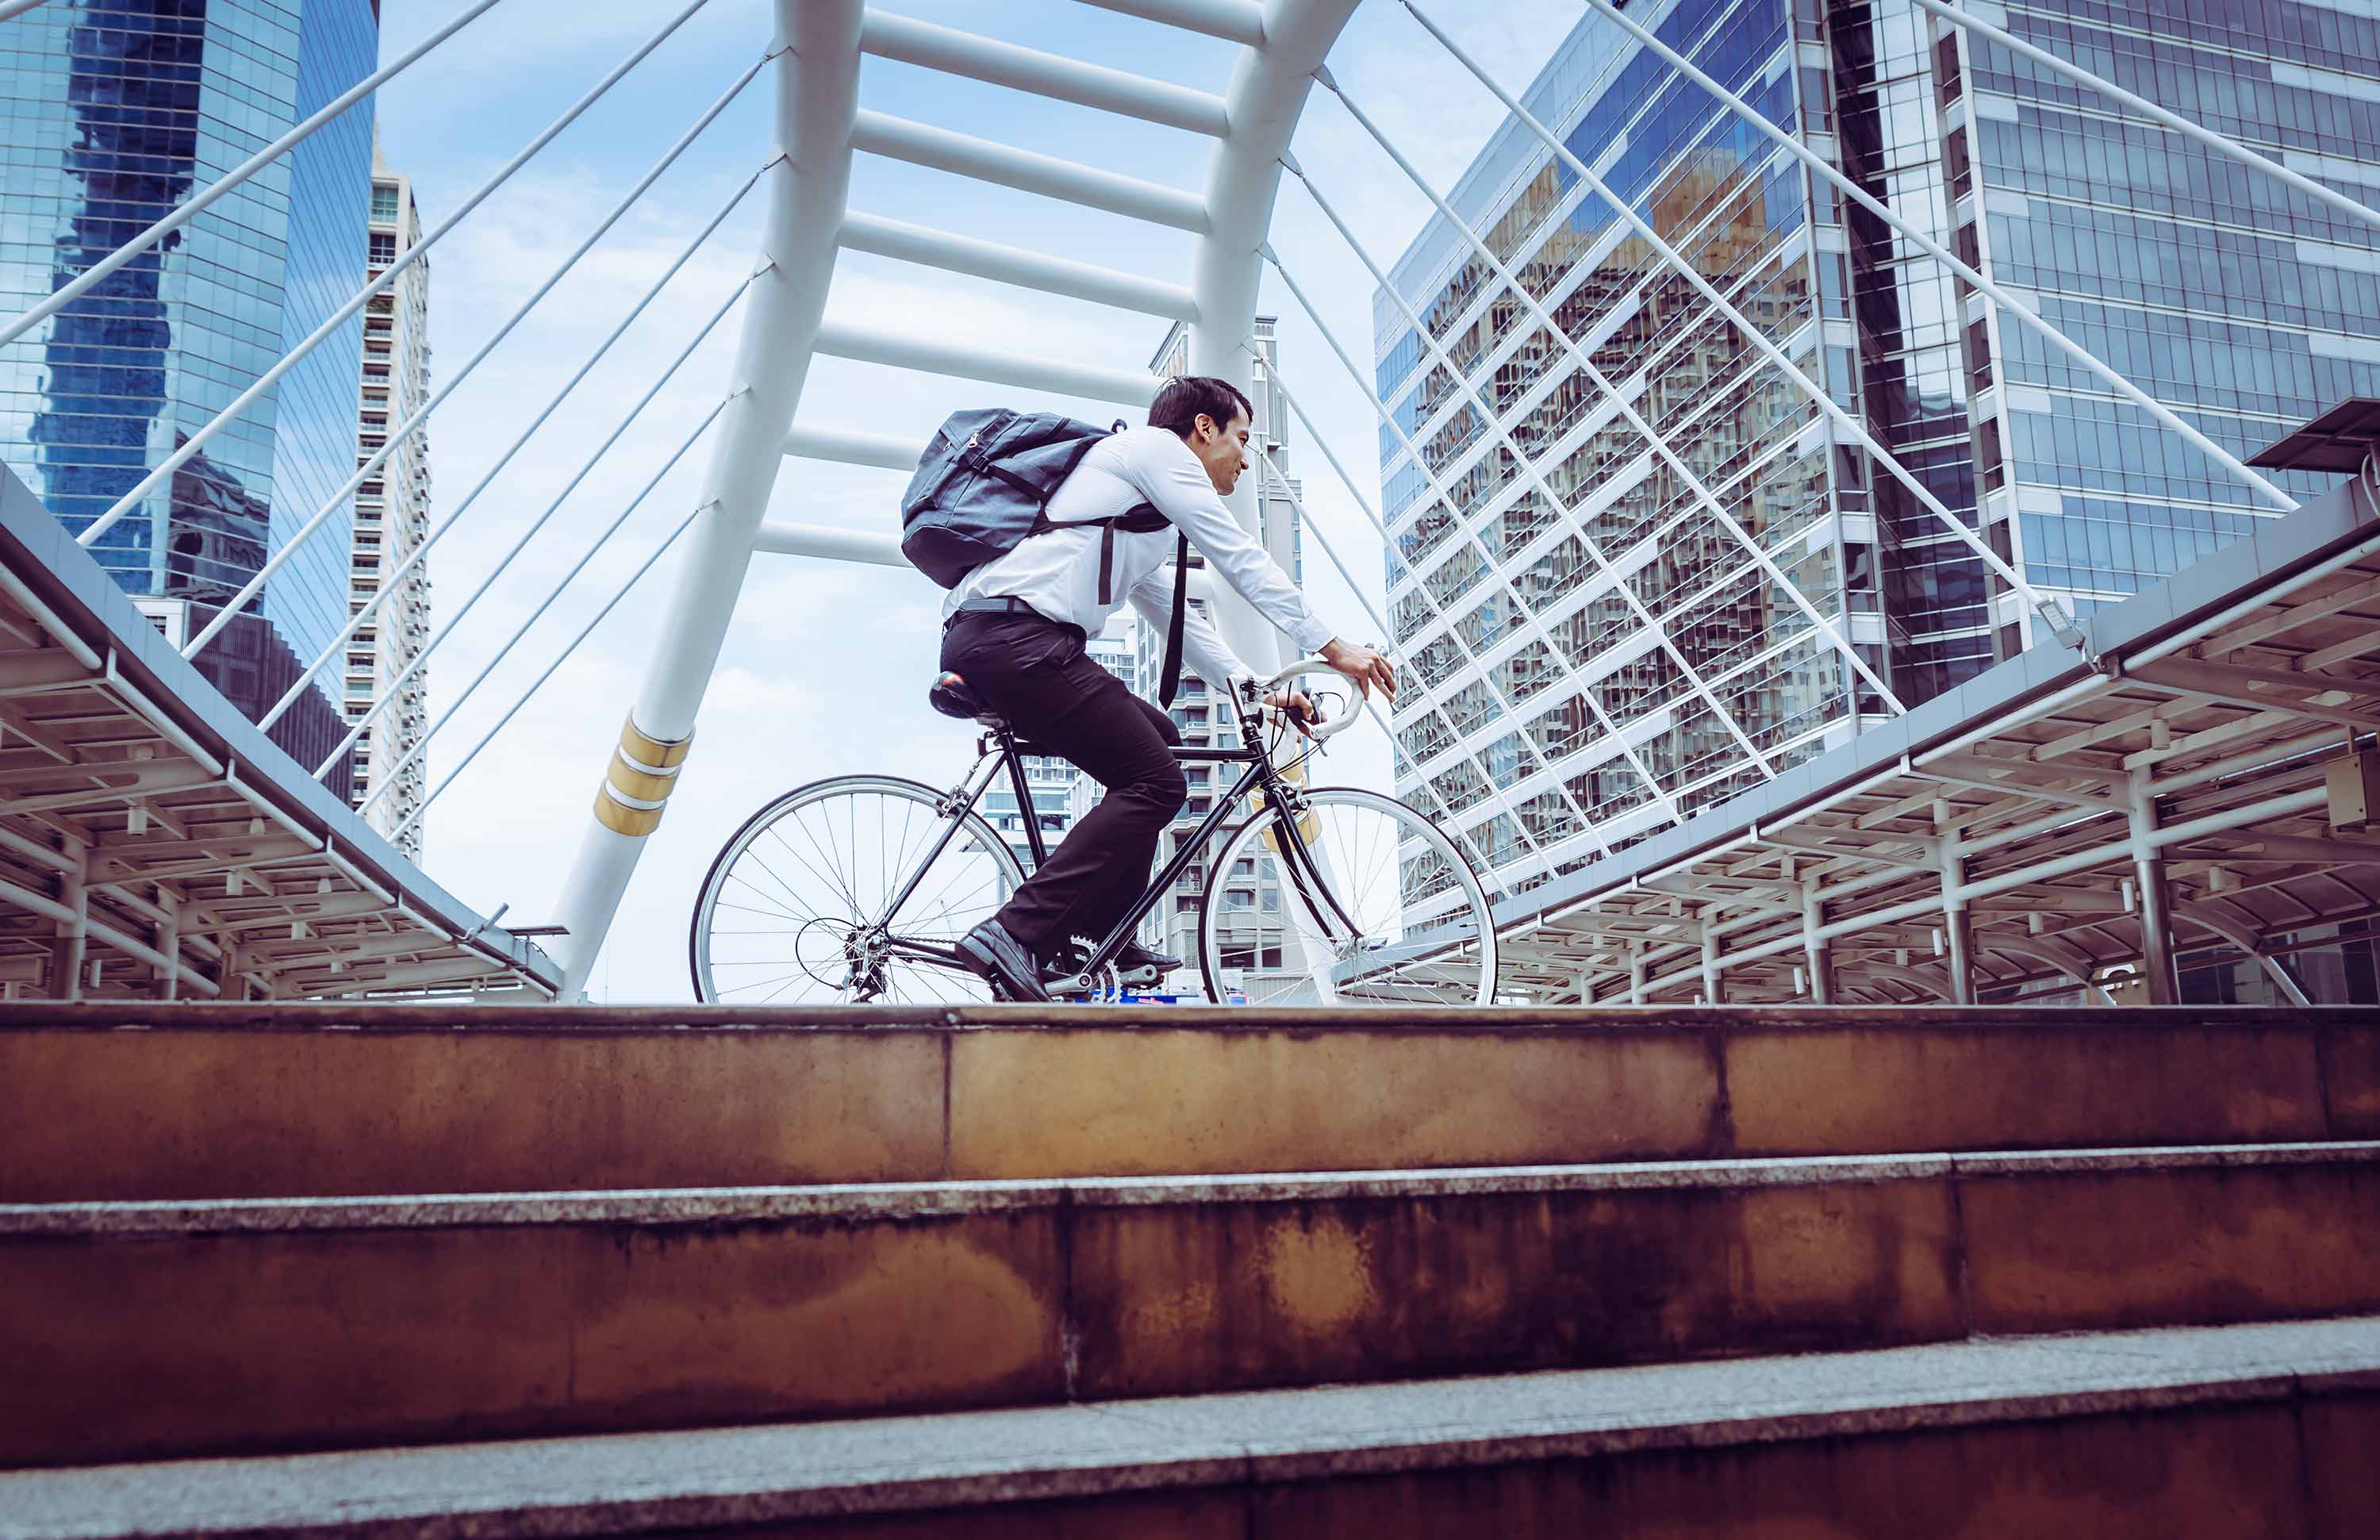 Panning shot of man on bicycle against modern architecture.